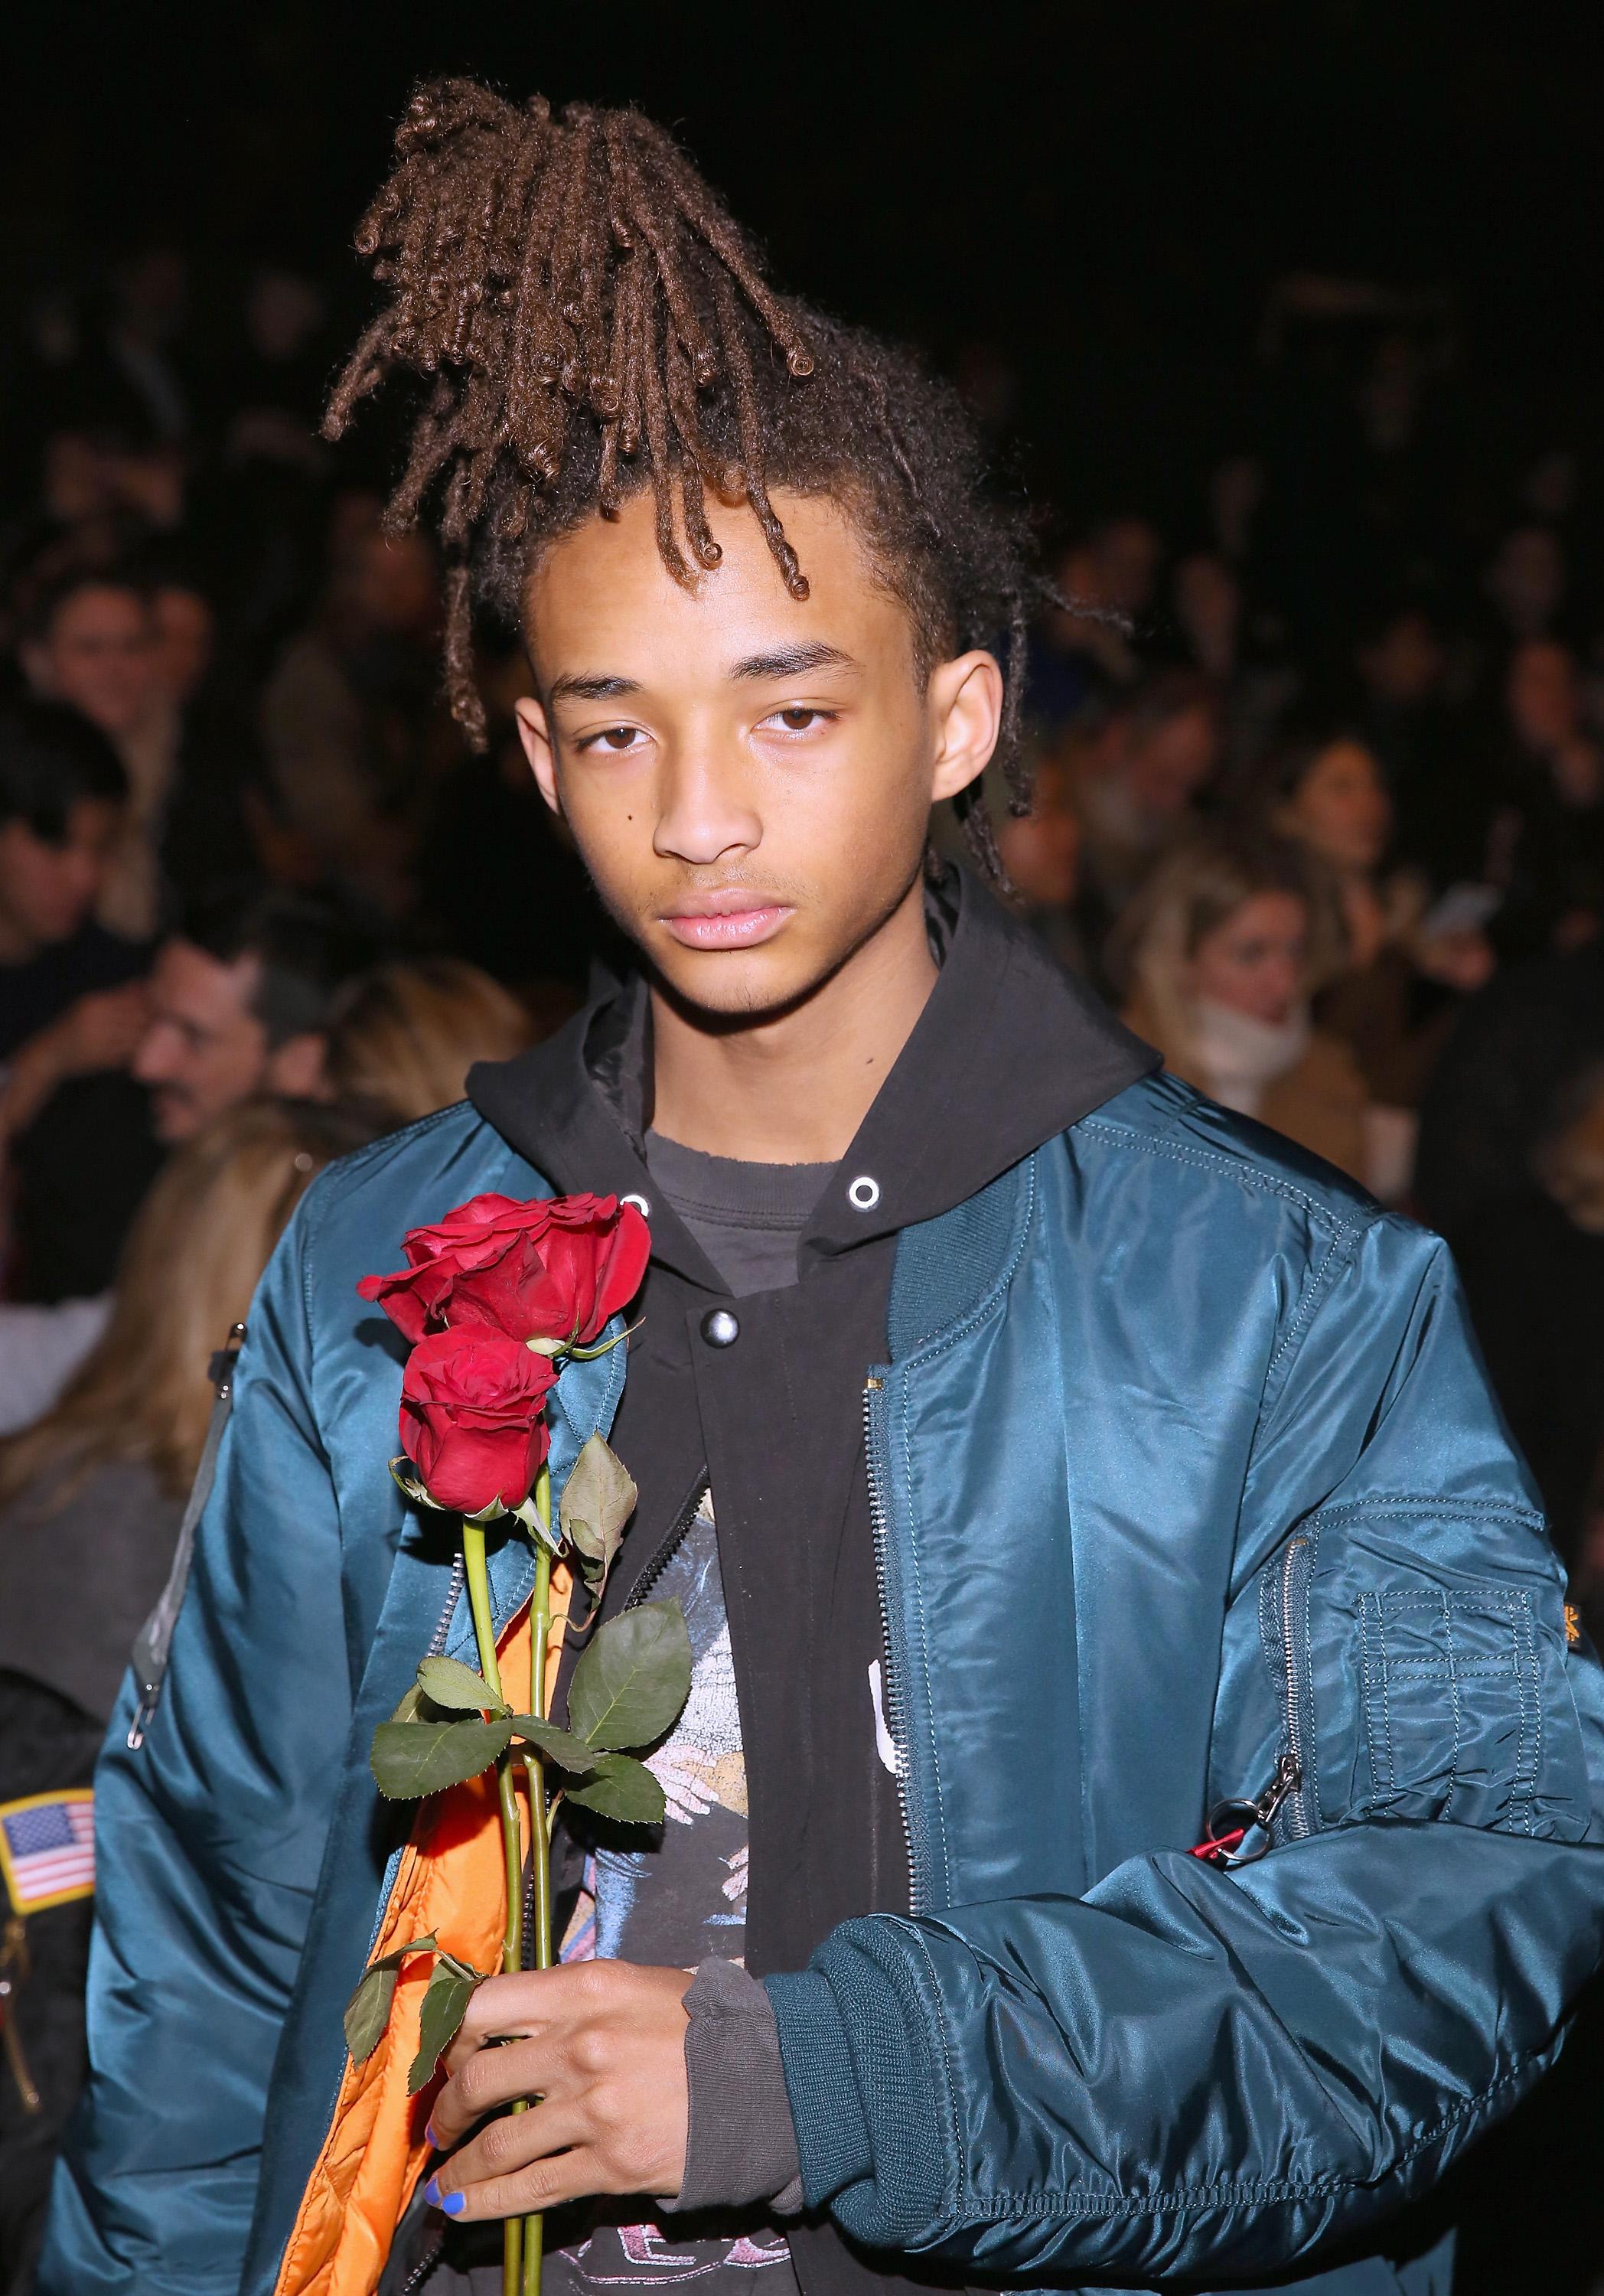 Jaden Smith And Girlfriend Sarah Snyder Pack On The PDA At Fashion Week!